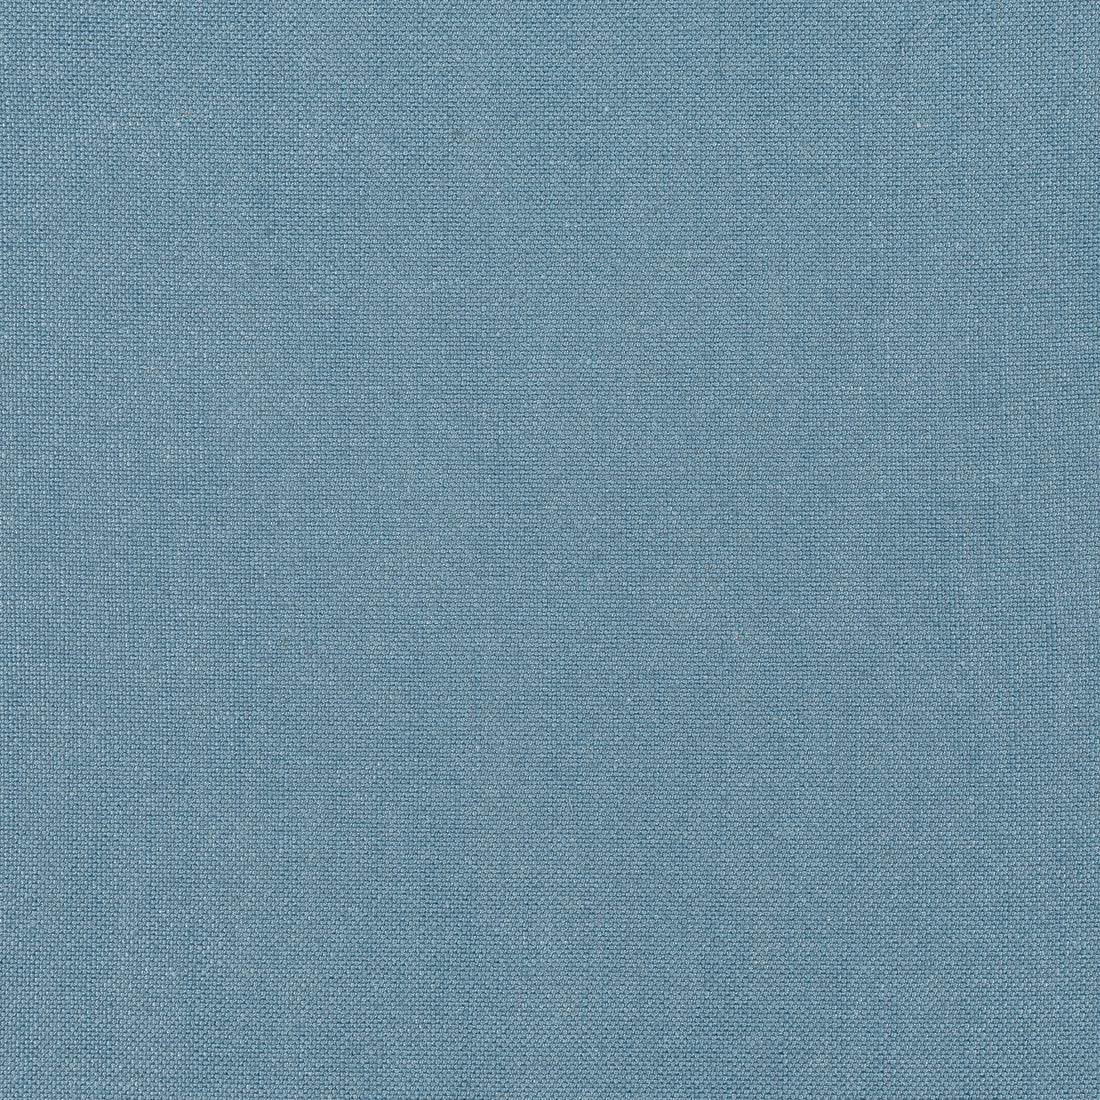 Palisade Linen fabric in denim color - pattern number FWW7642 - by Thibaut in the Palisades collection